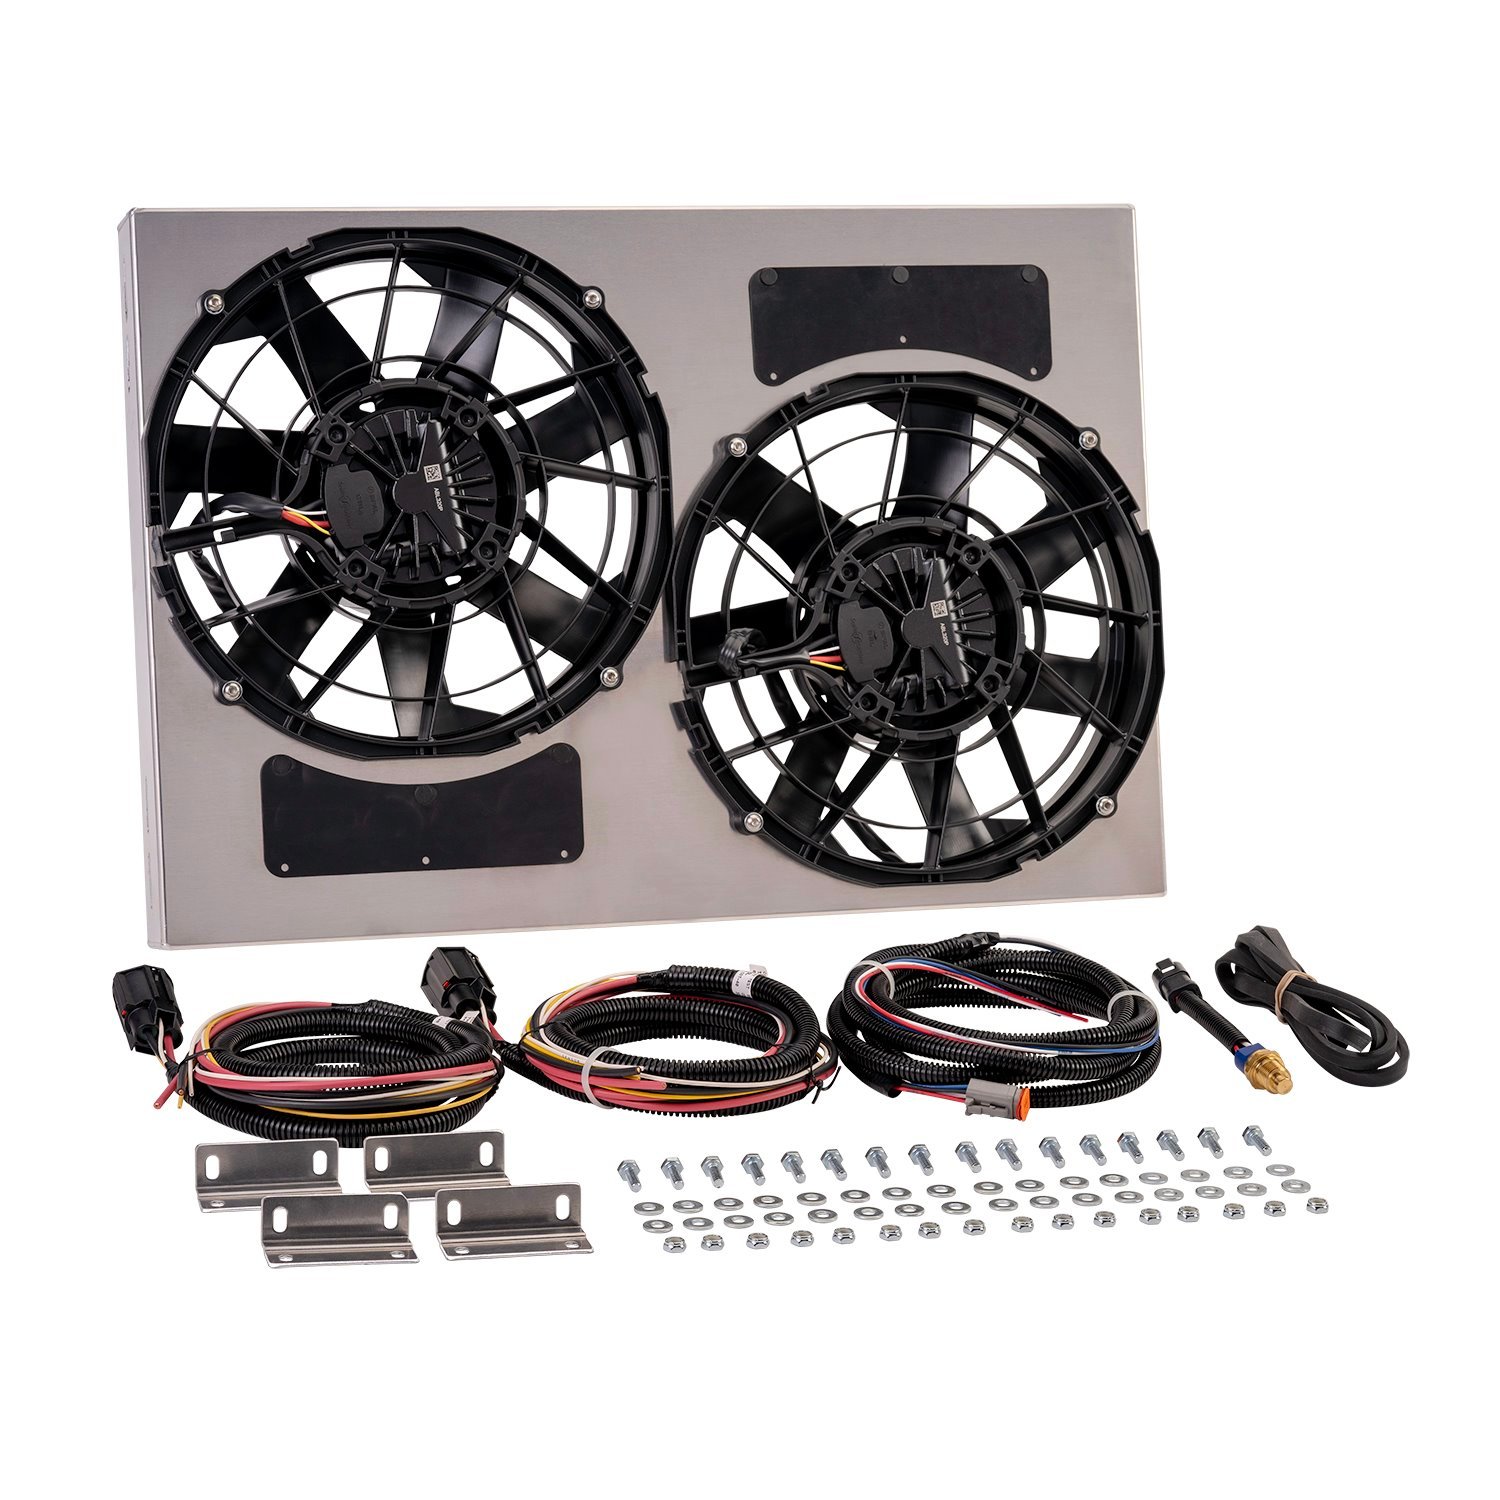 67926-185 Brushless Dual Powerpack 12 in. Radiator Fan Assembly with Integrated 185 Degree PWM Controller